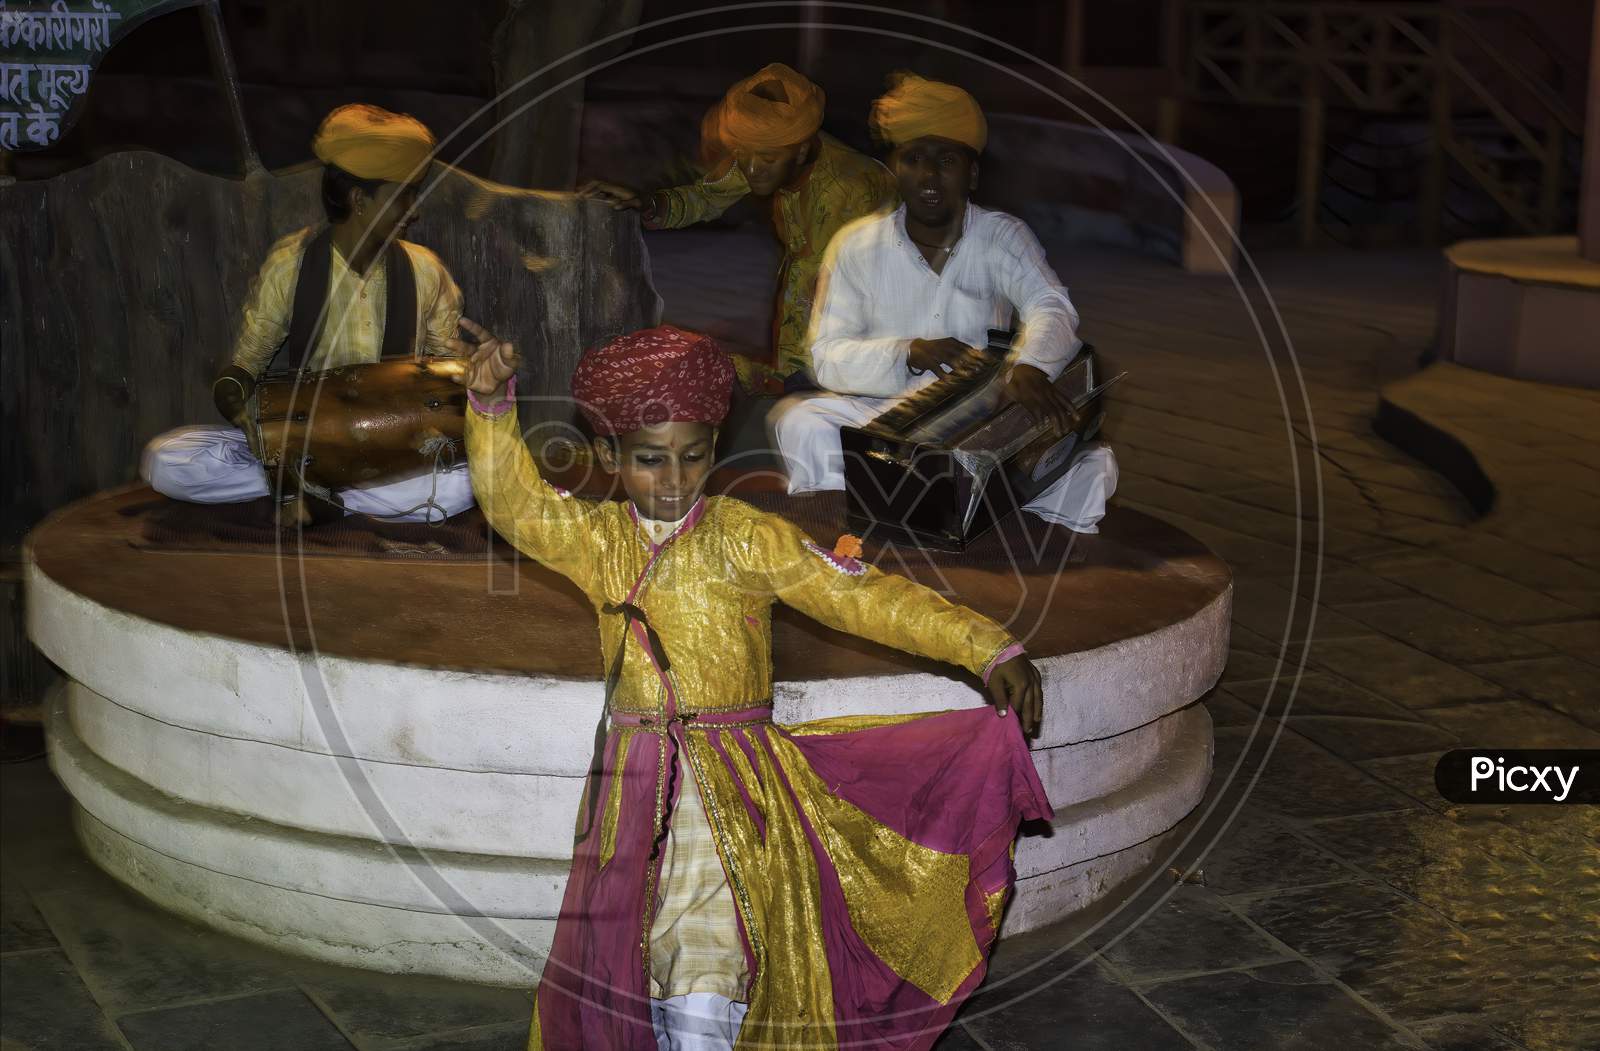 Jaipur, India - October 21, 2012: A Group Of Artist Musician And Dancer Performing Folk Dance Of Rajasthan State.